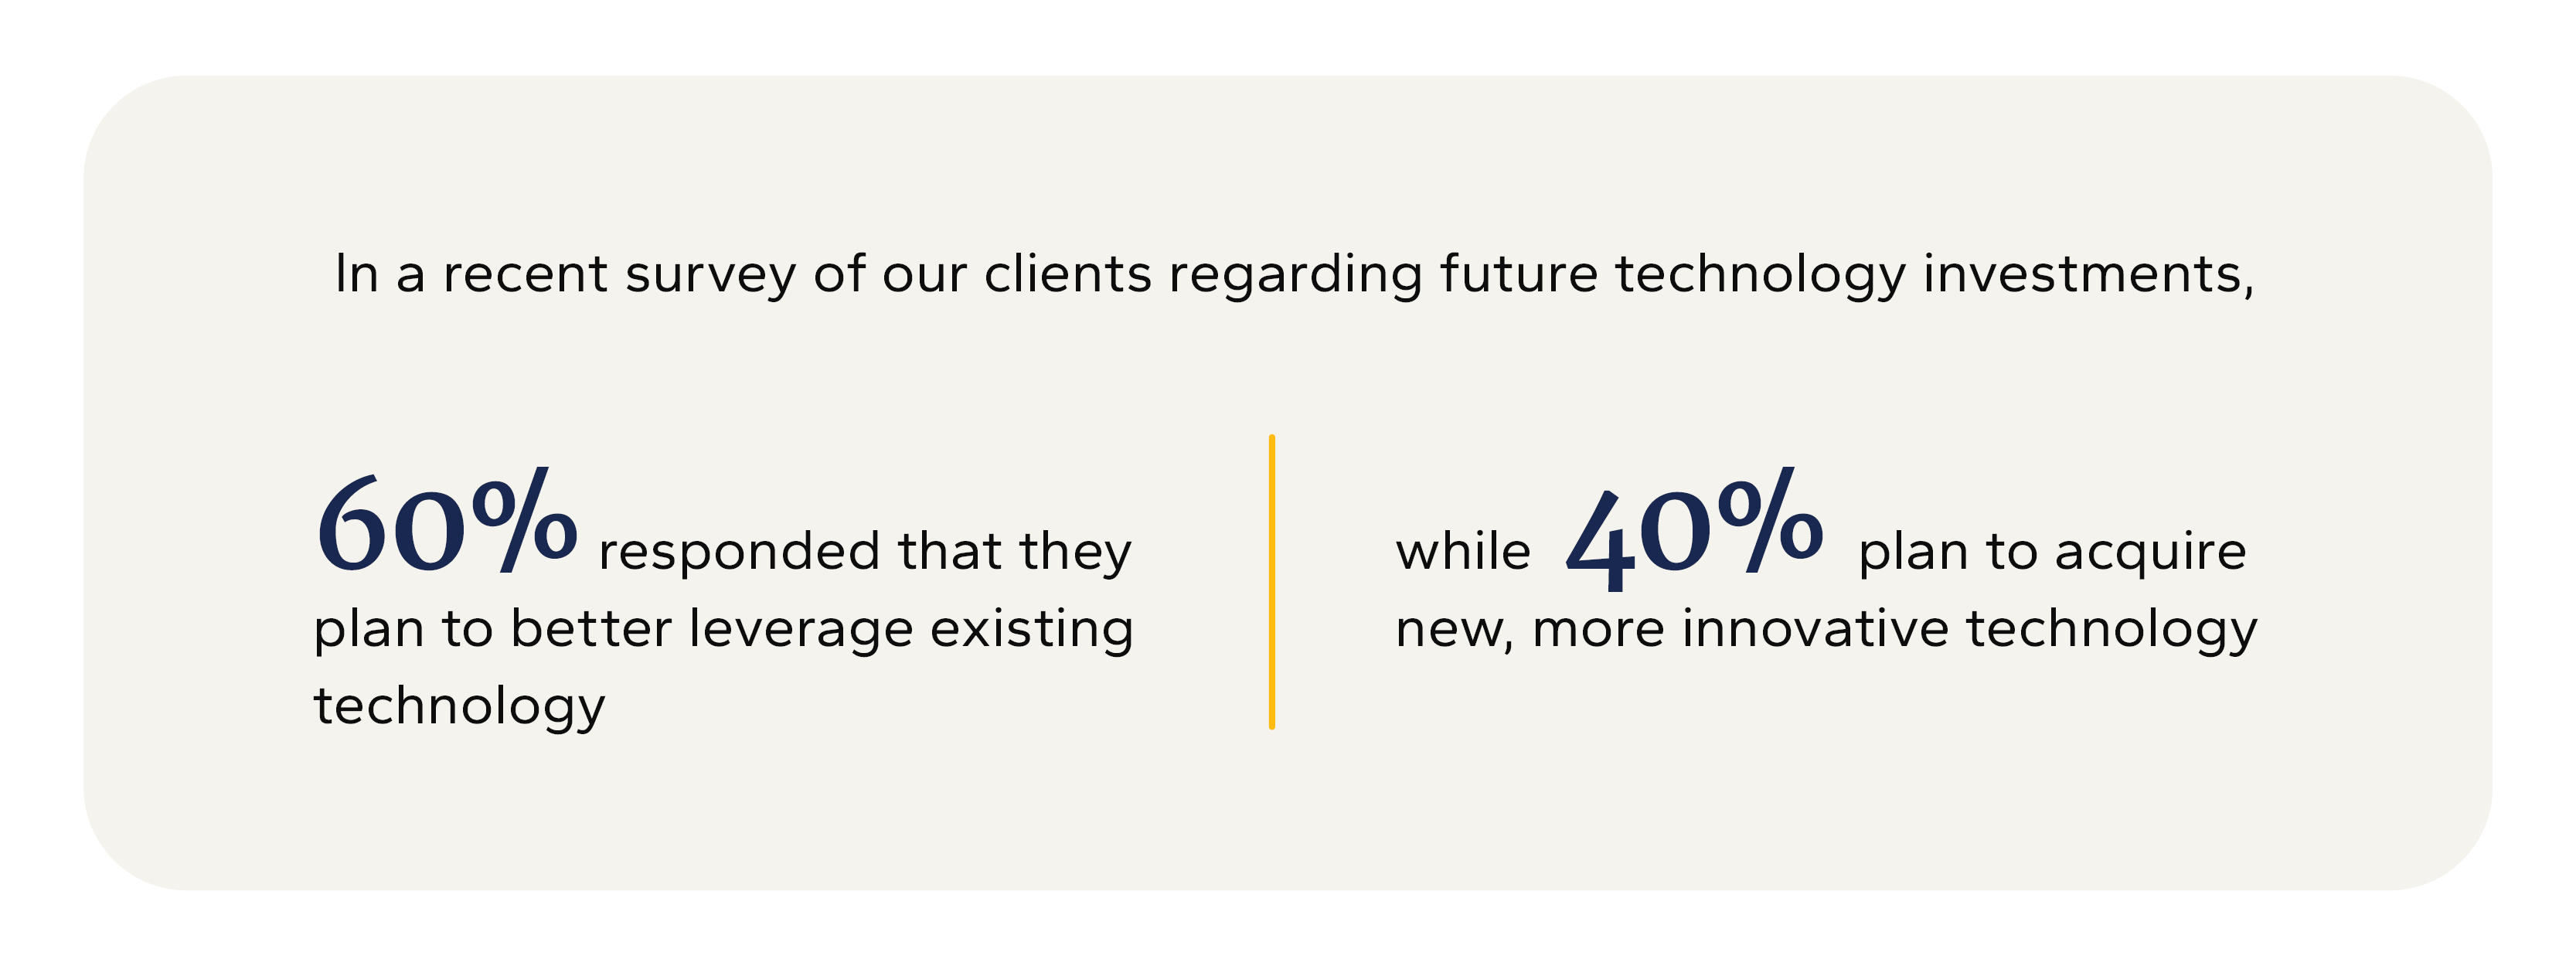 graphic regarding clients future technology investments